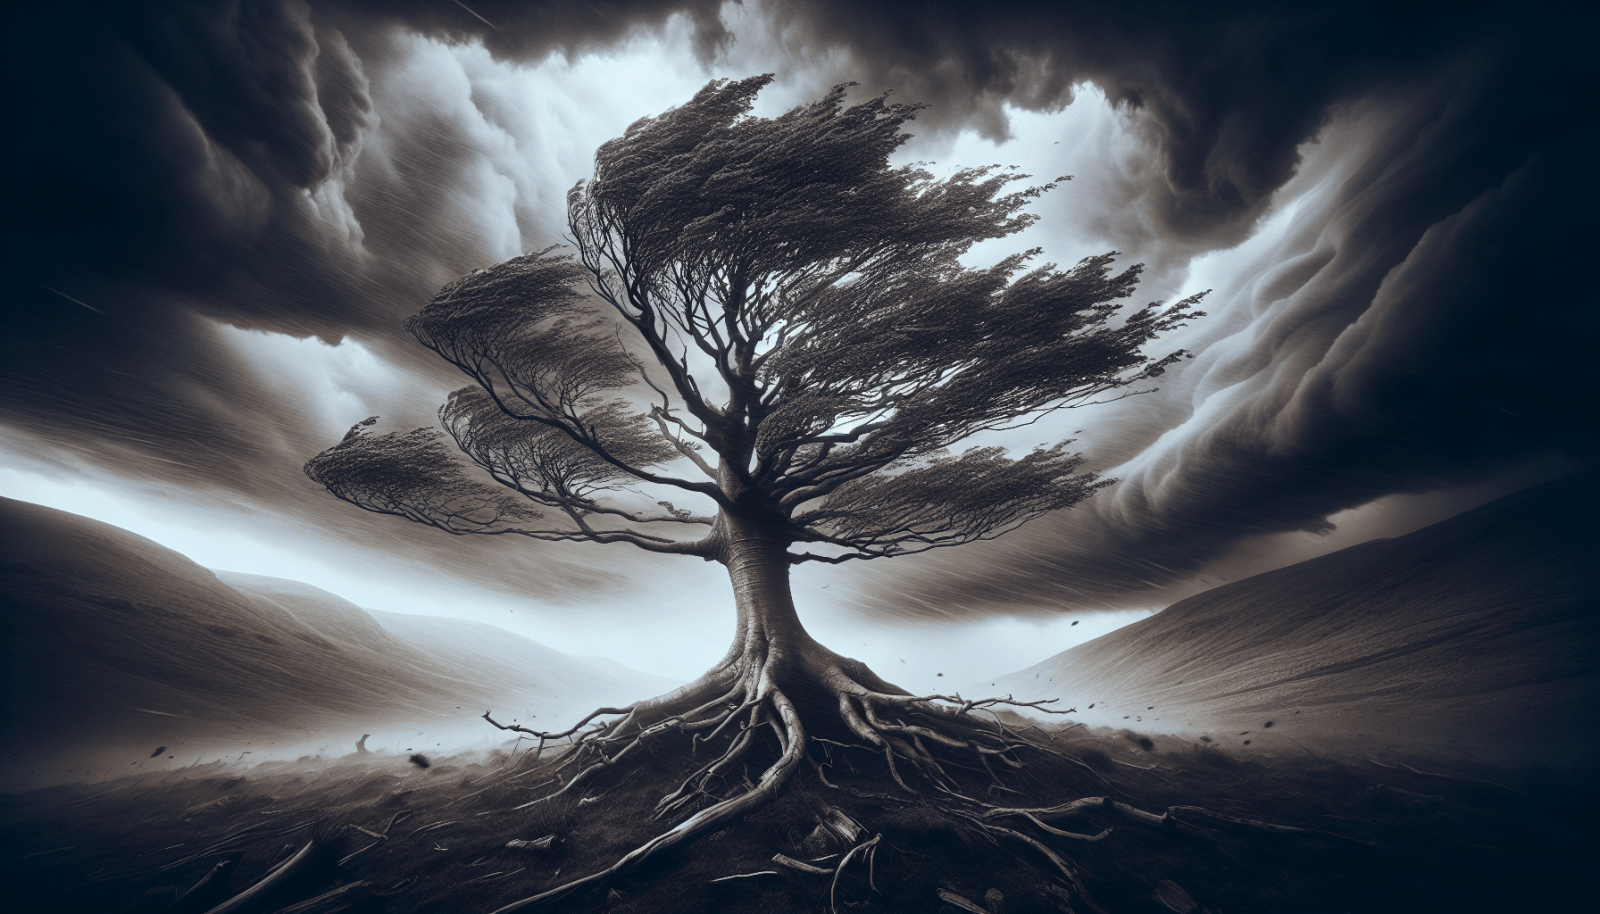 A monochrome image of a windswept tree with exposed roots on barren hills under a dramatic sky with swirling clouds.